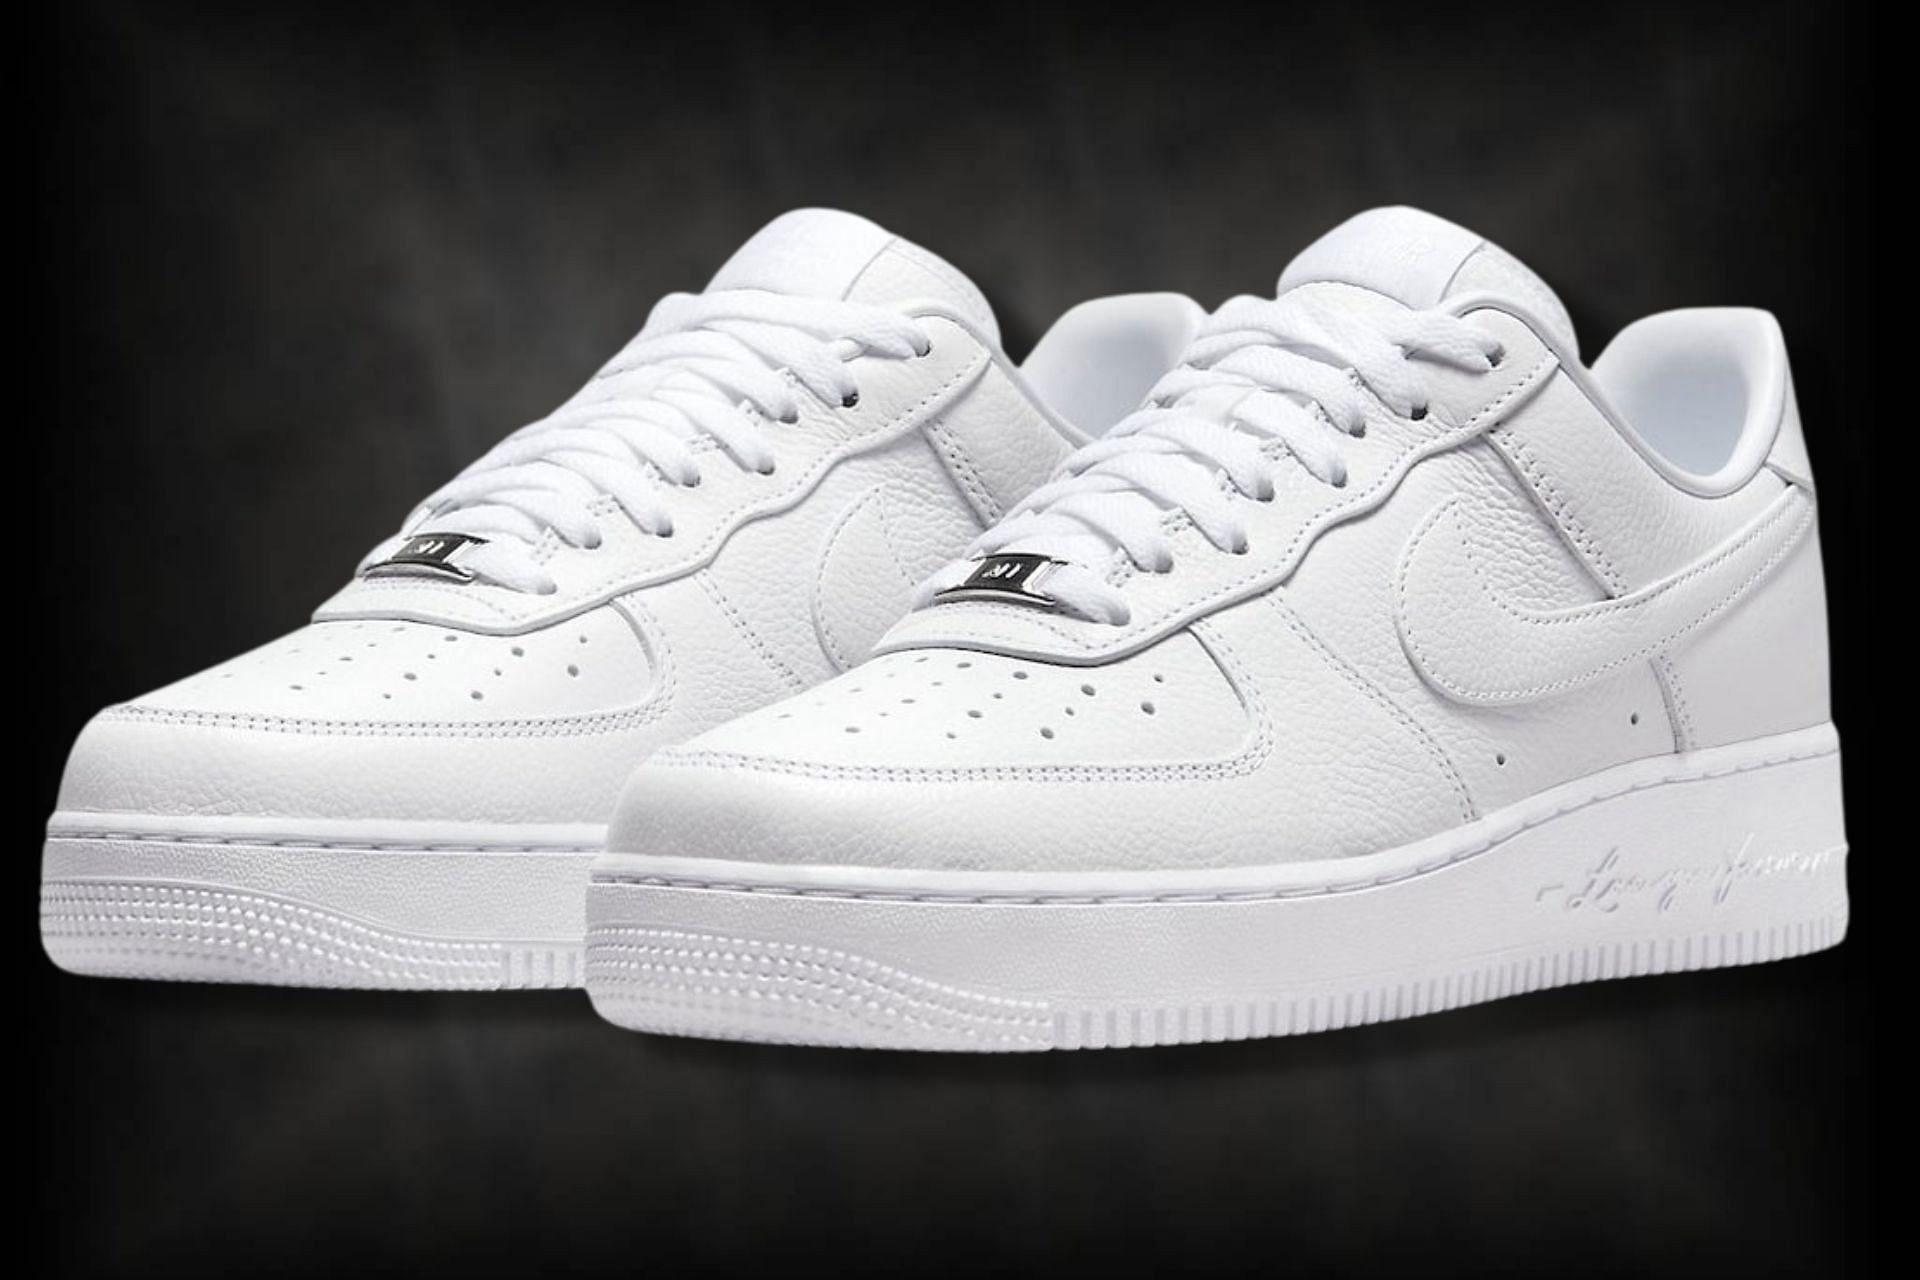 Where to buy Drake NOCTA x Nike Air Force 1 Low Certified Lover Boy ...